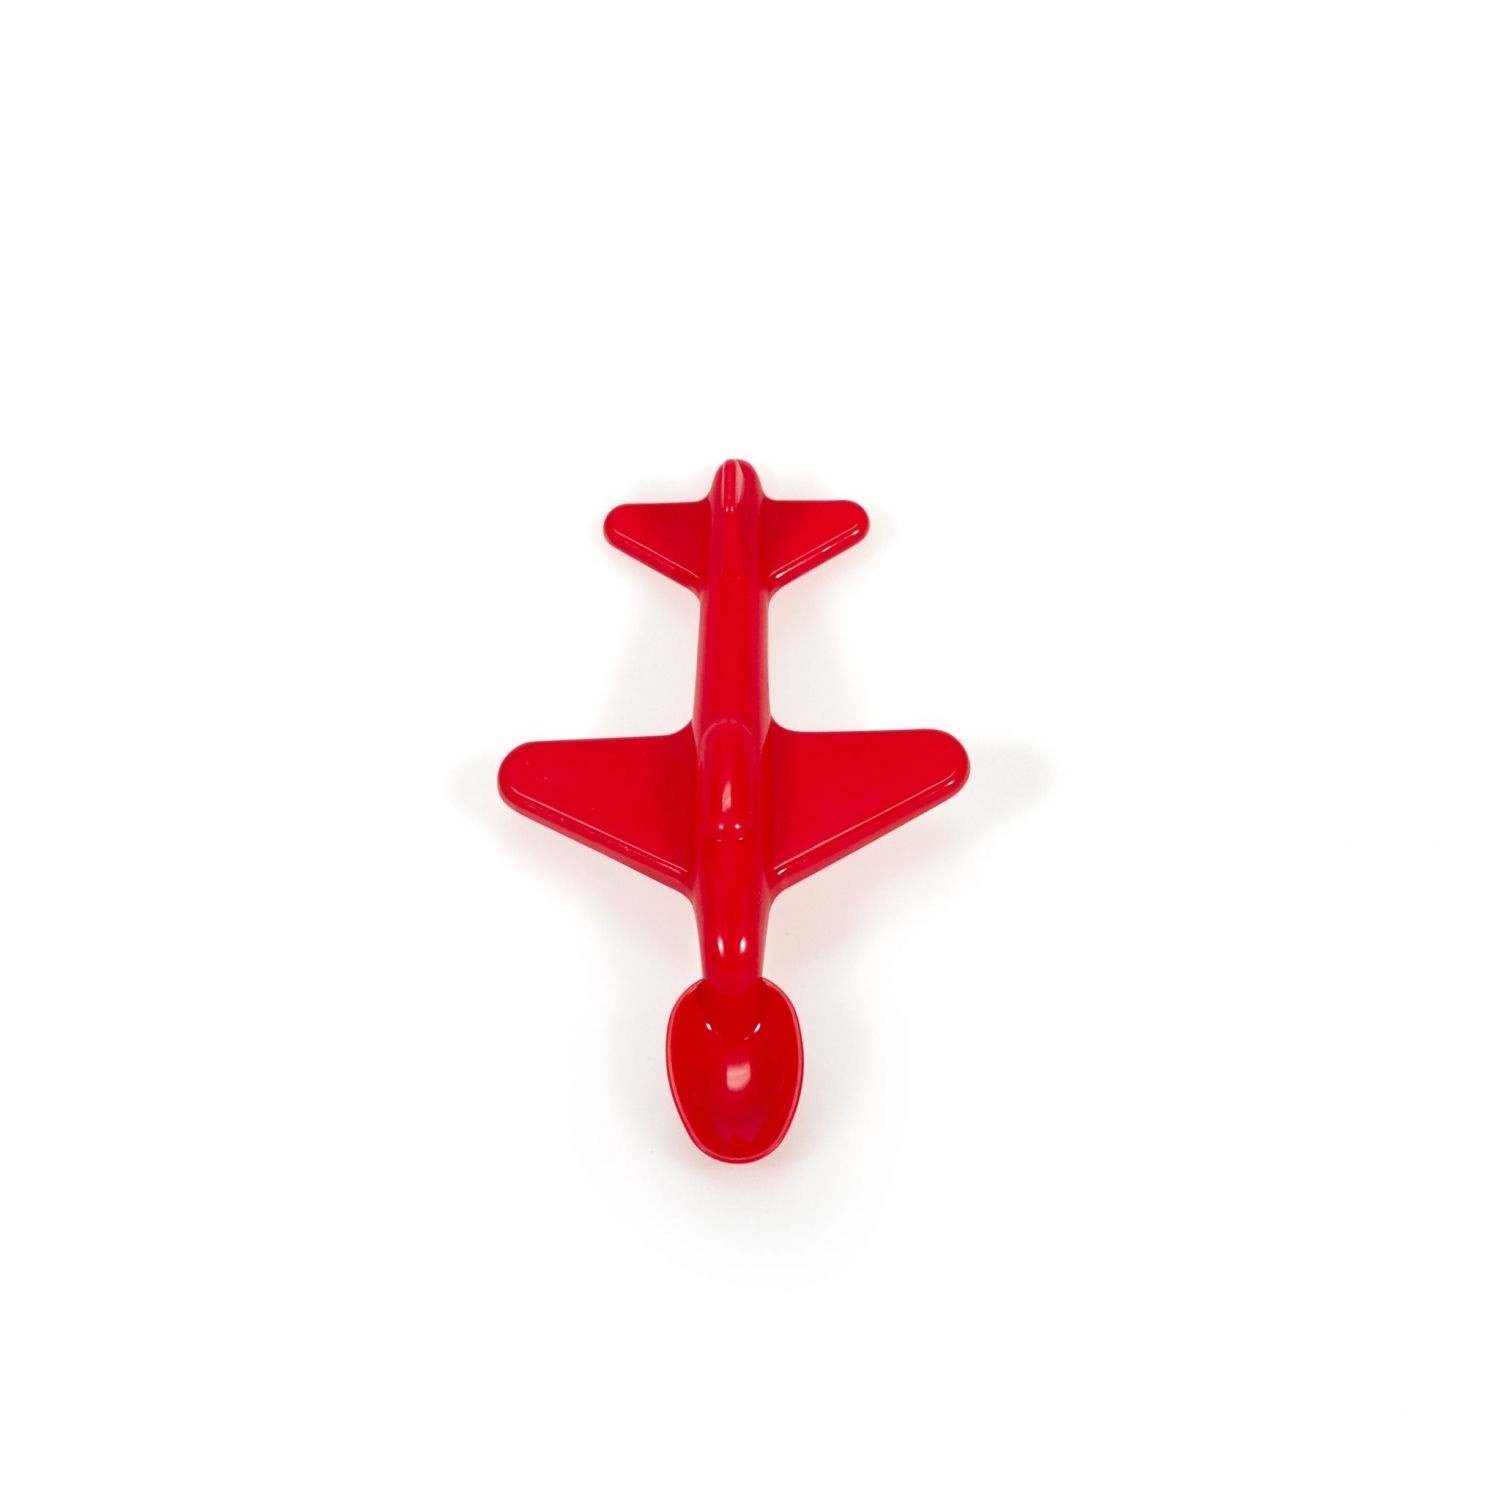 Spoon airoplane red